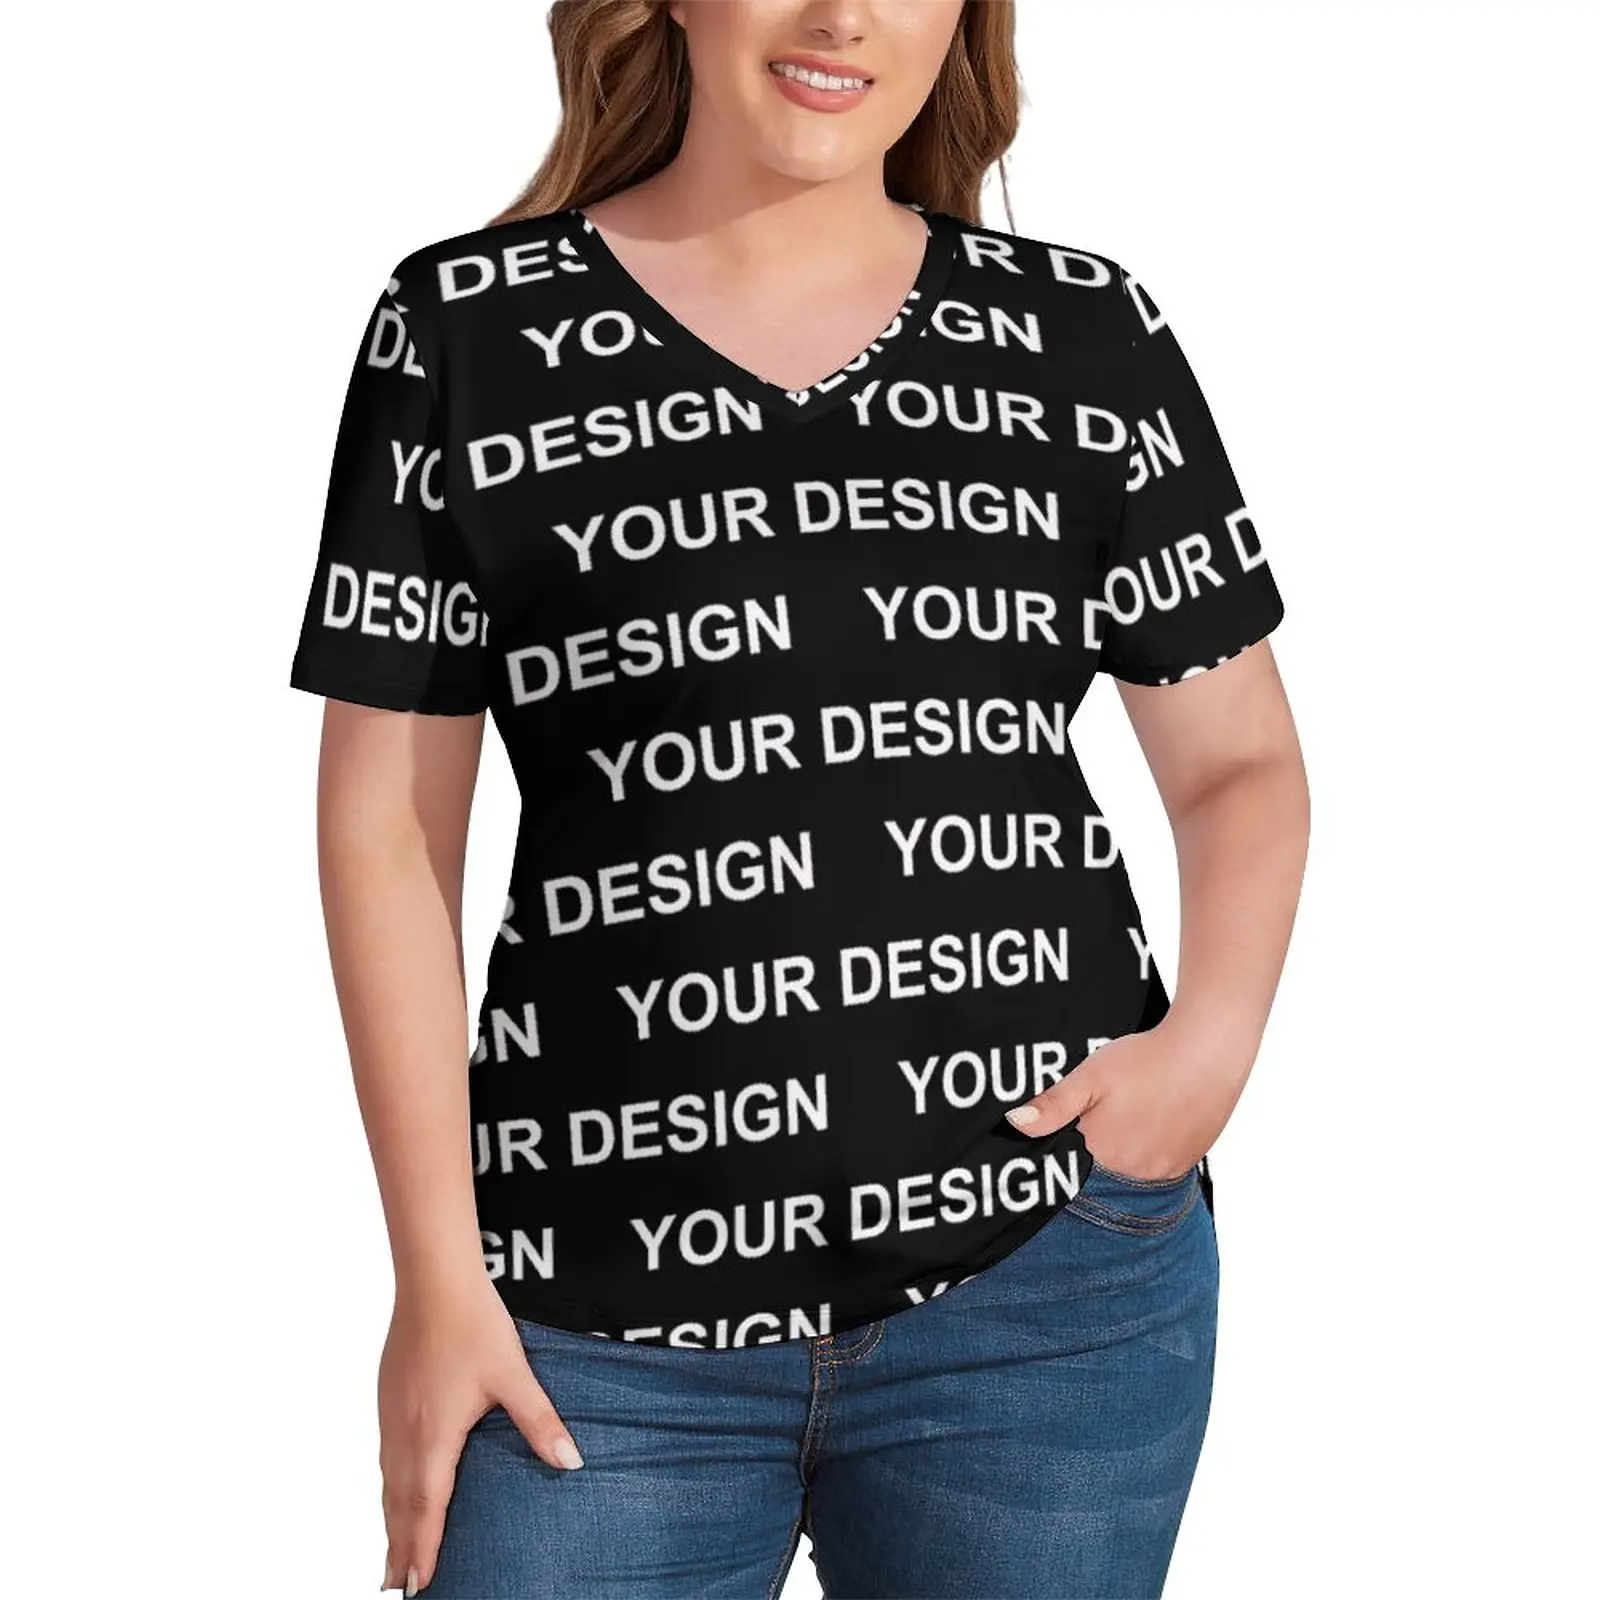 Add Design Customized T Shirts Custom Made Your Image Street Fashion V Neck T-Shirt Vintage Plus Size Tees Beach Print Tops Gift